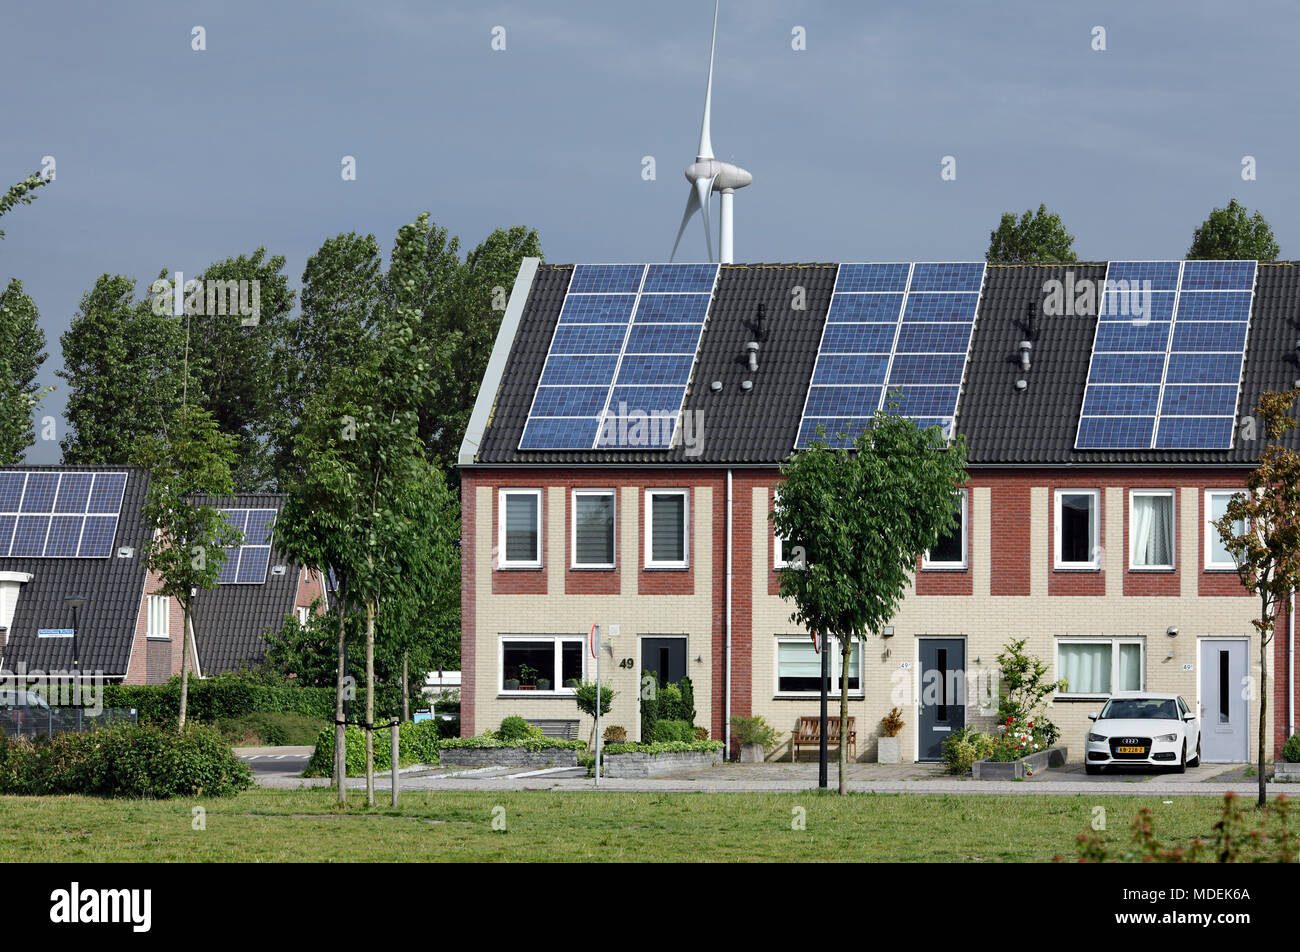 Houses topped with photovoltaic cells with a wind turbine behind in Stad van de Zon (City of the Sun), a sustainable suburb of Heerhugowaard, Holland. Stock Photo